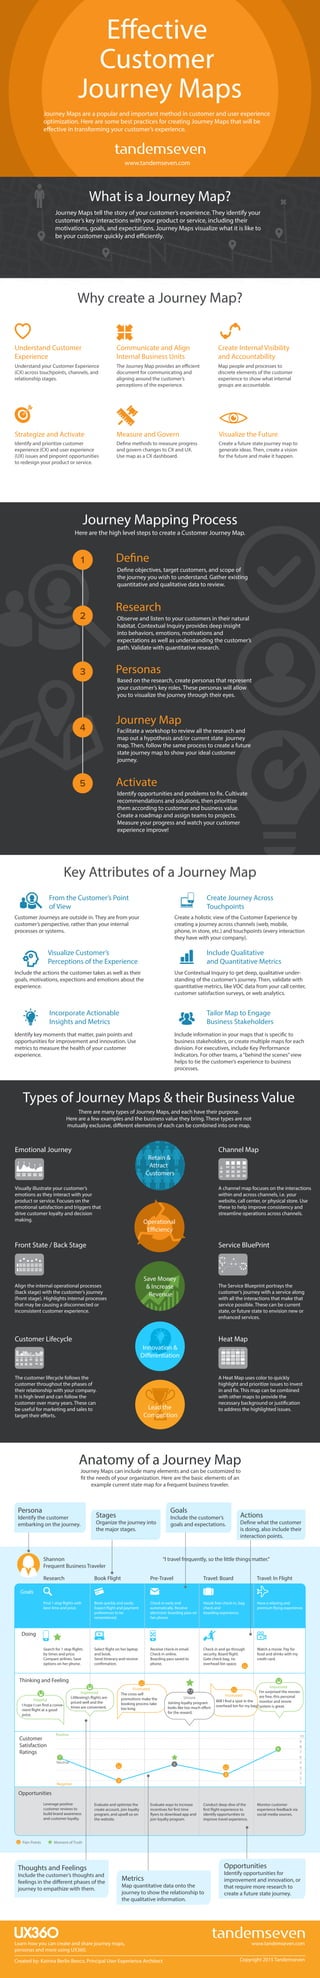 Journey Mapping Process
Effective
Customer
Journey Maps
Based on the research, create personas that represent
your customer’s key roles. These personas will allow
you to visualize the journey through their eyes.
Personas
Here are the high level steps to create a Customer Journey Map.
Journey Maps are a popular and important method in customer and user experience
optimization. Here are some best practices for creating Journey Maps that will be
effective in transforming your customer’s experience.
Create a holistic view of the Customer Experience by
creating a journey across channels (web, mobile,
phone, in store, etc.) and touchpoints (every interaction
they have with your company).
Identify key moments that matter, pain points and
opportunities for improvement and innovation. Use
metrics to measure the health of your customer
experience.
Incorporate Actionable
Insights and Metrics
Customer Journeys are outside in. They are from your
customer’s perspective, rather than your internal
processes or systems.
From the Customer’s Point
of View
Include the actions the customer takes as well as their
goals, motivations, expections and emotions about the
experience.
Use Contextual Inquiry to get deep, qualitative under-
standing of the customer’s journey. Then, validate with
quantitative metrics, like VOC data from your call center,
customer satisfaction surveys, or web analytics.
Include Qualitative
and Quantitative Metrics
Key Attributes of a Journey Map
Create Journey Across
Touchpoints
Visualize Customer’s
Perceptions of the Experience
Tailor Map to Engage
Business Stakeholders
Include information in your maps that is specific to
business stakeholders, or create multiple maps for each
division. For executives, include Key Performance
Indicators. For other teams, a“behind the scenes”view
helps to tie the customer’s experience to business
processes.
www.tandemseven.com
Measure and Govern
Understand your Customer Experience
(CX) across touchpoints, channels, and
relationship stages.
Communicate and Align
Internal Business Units
Strategize and Activate Visualize the Future
Understand Customer
Experience
The Journey Map provides an efficient
document for communicating and
aligning around the customer’s
perceptions of the experience.
Map people and processes to
discrete elements of the customer
experience to show what internal
groups are accountable.
Identify and prioritize customer
experience (CX) and user experience
(UX) issues and pinpoint opportunities
to redesign your product or service.
Create a future state journey map to
generate ideas. Then, create a vision
for the future and make it happen.
Create Internal Visibility
and Accountability
Why create a Journey Map?
Define methods to measure progress
and govern changes to CX and UX.
Use map as a CX dashboard.
Created by: Katrina Berlin Benco, Principal User Experience Architect
www.tandemseven.com
Journey Maps tell the story of your customer’s experience. They identify your
customer’s key interactions with your product or service, including their
motivations, goals, and expectations. Journey Maps visualize what it is like to
be your customer quickly and efficiently.
What is a Journey Map?
Anatomy of a Journey Map
Doing
Research
Shannon
Frequent Business Traveler
Opportunities
Thinking and Feeling
Book Flight Pre-Travel Travel: Board Travel: In Flight
Goals
Pain Points Moment of Truth
Find 1 stop flights with
best time and price.
Book quickly and easily.
Expect flight and payment
preferences to be
remembered.
Check in early and
automatically. Receive
electronic boarding pass on
her phone.
Hassle free check-in, bag
check and
boarding experience.
Search for 1 stop flights
by times and price.
Compare airlines. Save
options on her phone.
Select flight on her laptop
and book.
Send itinerary and receive
confirmation.
Receive check-in email.
Check in online.
Boarding pass saved to
phone.
Check in and go through
security. Board flight.
Gate check bag, no
overhead bin space.
“I travel frequently, so the little things matter.”
I’m surprised the movies
are free, this personal
monitor and movie
system is great.I hope I can find a conve-
nient flight at a good
price.
Leverage positive
customer reviews to
build brand awareness
and customer loyalty.
Evaluate and optimize the
create account, join loyalty
program, and upsell ux on
the website.
Evaluate ways to increase
incentives for first time
flyers to download app and
join loyalty program.
Conduct deep dive of the
first flight experience to
identify opportunities to
improve travel experience.
Monitor customer
experience feedback via
social media sources.
Customer
Satisfaction
Ratings
10
9
8
7
6
5
4
3
2
1
5
3
8
Positive
Neutral
Negative
Littlewing’s flights are
priced well and the
times are convenient.
Impressed The cross-sell
promotions make the
booking process take
too long.
Frustrated
Hopeful
Impressed
Will I find a spot in the
overhead bin for my bag?
Joining loyalty program
looks like too much effort
for the reward.
Unsure
Frustrated
Watch a movie. Pay for
food and drinks with my
credit card.
Have a relaxing and
premium flying experience.
2
7
Persona
Identify the customer
embarking on the journey.
Stages
Organize the journey into
the major stages.
Goals
Include the customer’s
goals and expectations.
Actions
Define what the customer
is doing, also include their
interaction points.
Journey Maps can include many elements and can be customized to
fit the needs of your organization. Here are the basic elements of an
example current state map for a frequent business traveler.
Thoughts and Feelings
Include the customer’s thoughts and
feelings in the different phases of the
journey to empathize with them.
Metrics
Map quantitative data onto the
journey to show the relationship to
the qualitative information.
Opportunities
Identify opportunities for
improvement and innovation, or
that require more research to
create a future state journey.
The Service Blueprint portrays the
customer’s journey with a service along
with all the interactions that make that
service possible. These can be current
state, or future state to envision new or
enhanced services.
Emotional Journey
Types of Journey Maps & their Business Value
There are many types of Journey Maps, and each have their purpose.
Here are a few examples and the business value they bring. These types are not
mutually exclusive, different elemetns of each can be combined into one map.
Front State / Back Stage
Channel Map
Customer Lifecycle
Visually illustrate your customer’s
emotions as they interact with your
product or service. Focuses on the
emotional satisfaction and triggers that
drive customer loyalty and decision
making.
A Heat Map uses color to quickly
highlight and prioritize issues to invest
in and fix. This map can be combined
with other maps to provide the
necessary background or justification
to address the highlighted issues.
Align the internal operational processes
(back stage) with the customer’s journey
(front stage). Highlights internal processes
that may be causing a disconnected or
inconsistent customer experience.
Save Money
& Increase
Revenue
Lead the
Competition
Research
Observe and listen to your customers in their natural
habitat. Contextual Inquiry provides deep insight
into behaviors, emotions, motivations and
expectations as well as understanding the customer’s
path. Validate with quantitative research.
Journey Map
Facilitate a workshop to review all the research and
map out a hypothesis and/or current state journey
map. Then, follow the same process to create a future
state journey map to show your ideal customer
journey.
Define
Define objectives, target customers, and scope of
the journey you wish to understand. Gather existing
quantitative and qualitative data to review.
Activate
Identify opportunities and problems to fix. Cultivate
recommendations and solutions, then prioritize
them according to customer and business value.
Create a roadmap and assign teams to projects.
Measure your progress and watch your customer
experience improve!
Service BluePrint
The customer lifecycle follows the
customer throughout the phases of
their relationship with your company.
It is high level and can follow the
customer over many years. These can
be useful for marketing and sales to
target their efforts.
Heat Map
A channel map focuses on the interactions
within and across channels, i.e. your
website, call center, or physical store. Use
these to help improve consistency and
streamline operations across channels.
Innovation &
Differentiation
Operational
Efficiency
Retain &
Attract
Customers
Learn how you can create and share journey maps,
personas and more using UX360.
Copyright 2015 Tandemseven
 